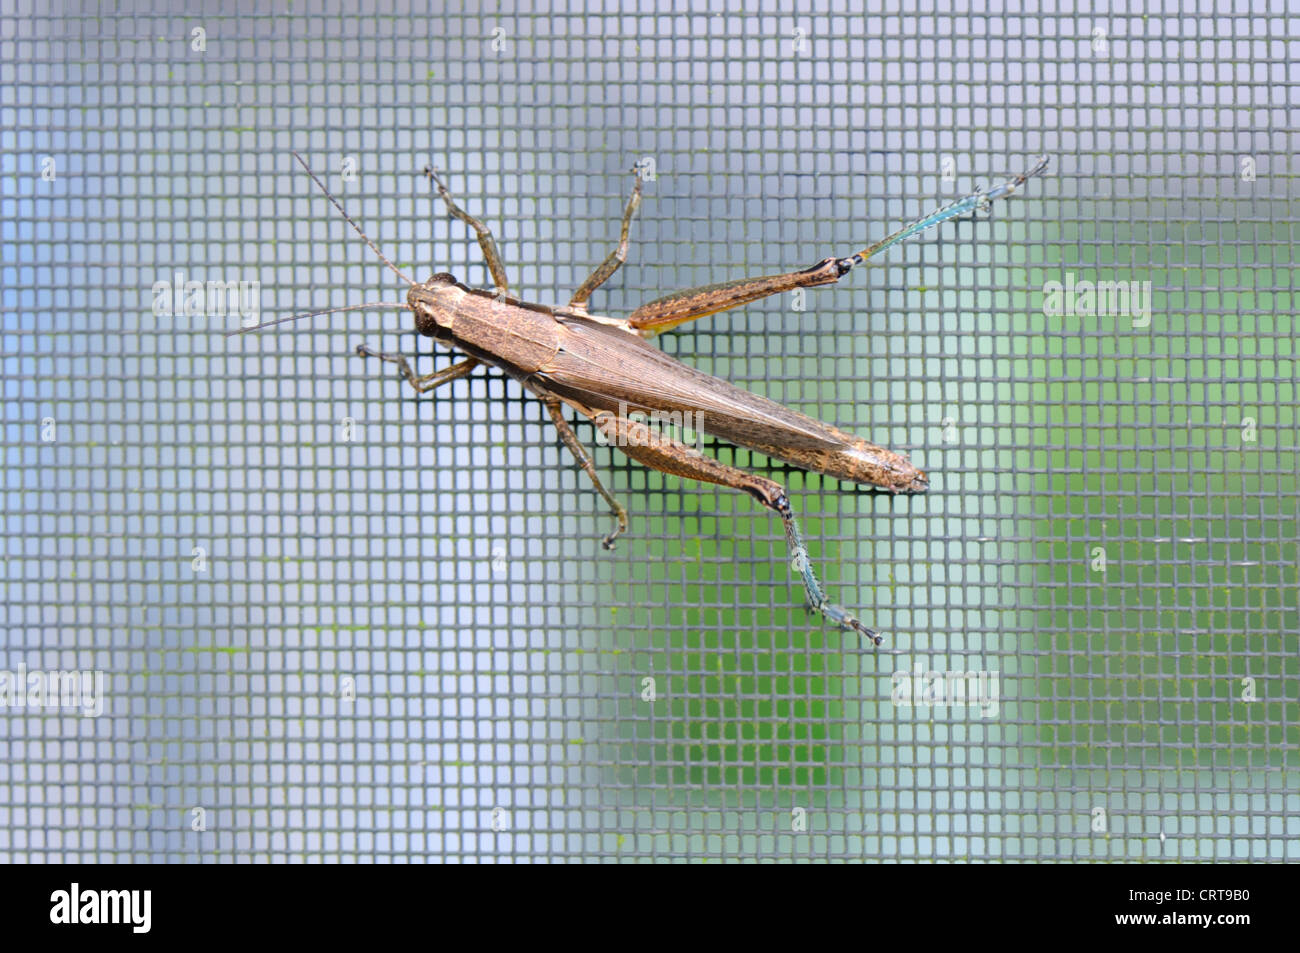 Orthoptera Cricket on bug screen in Florida, USA Stock Photo